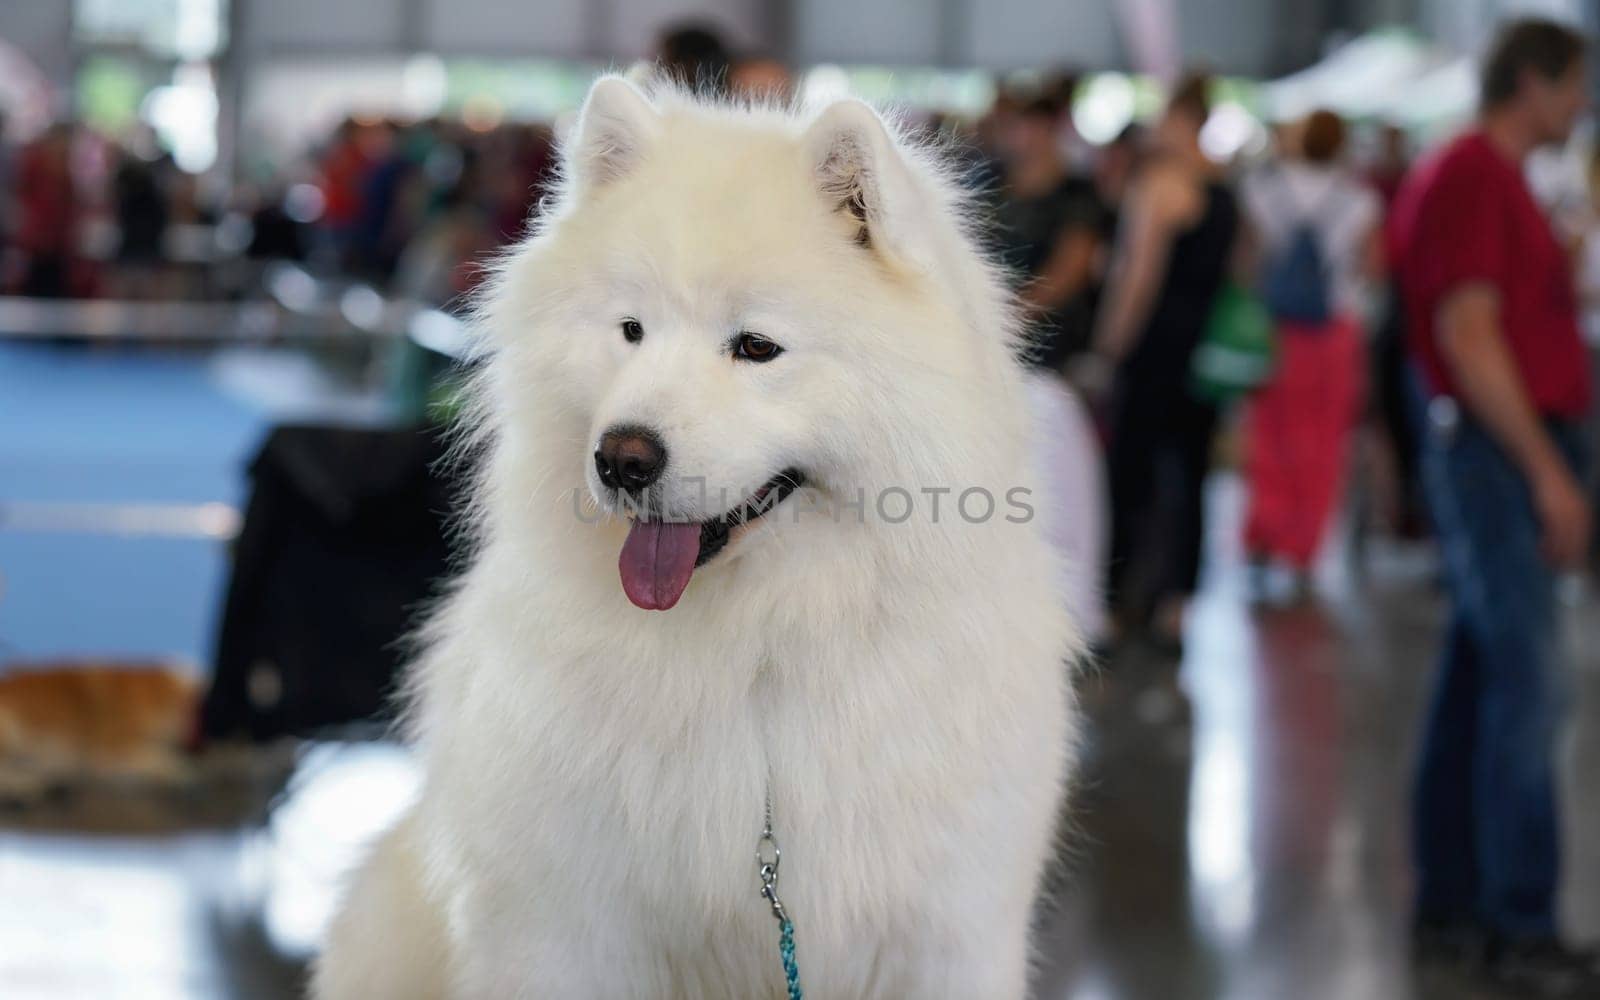 White Samoyed aka. Bjelkier spitz type dog breed, closeup on head, tongue sticking out, blurred people indoors in background by Ivanko